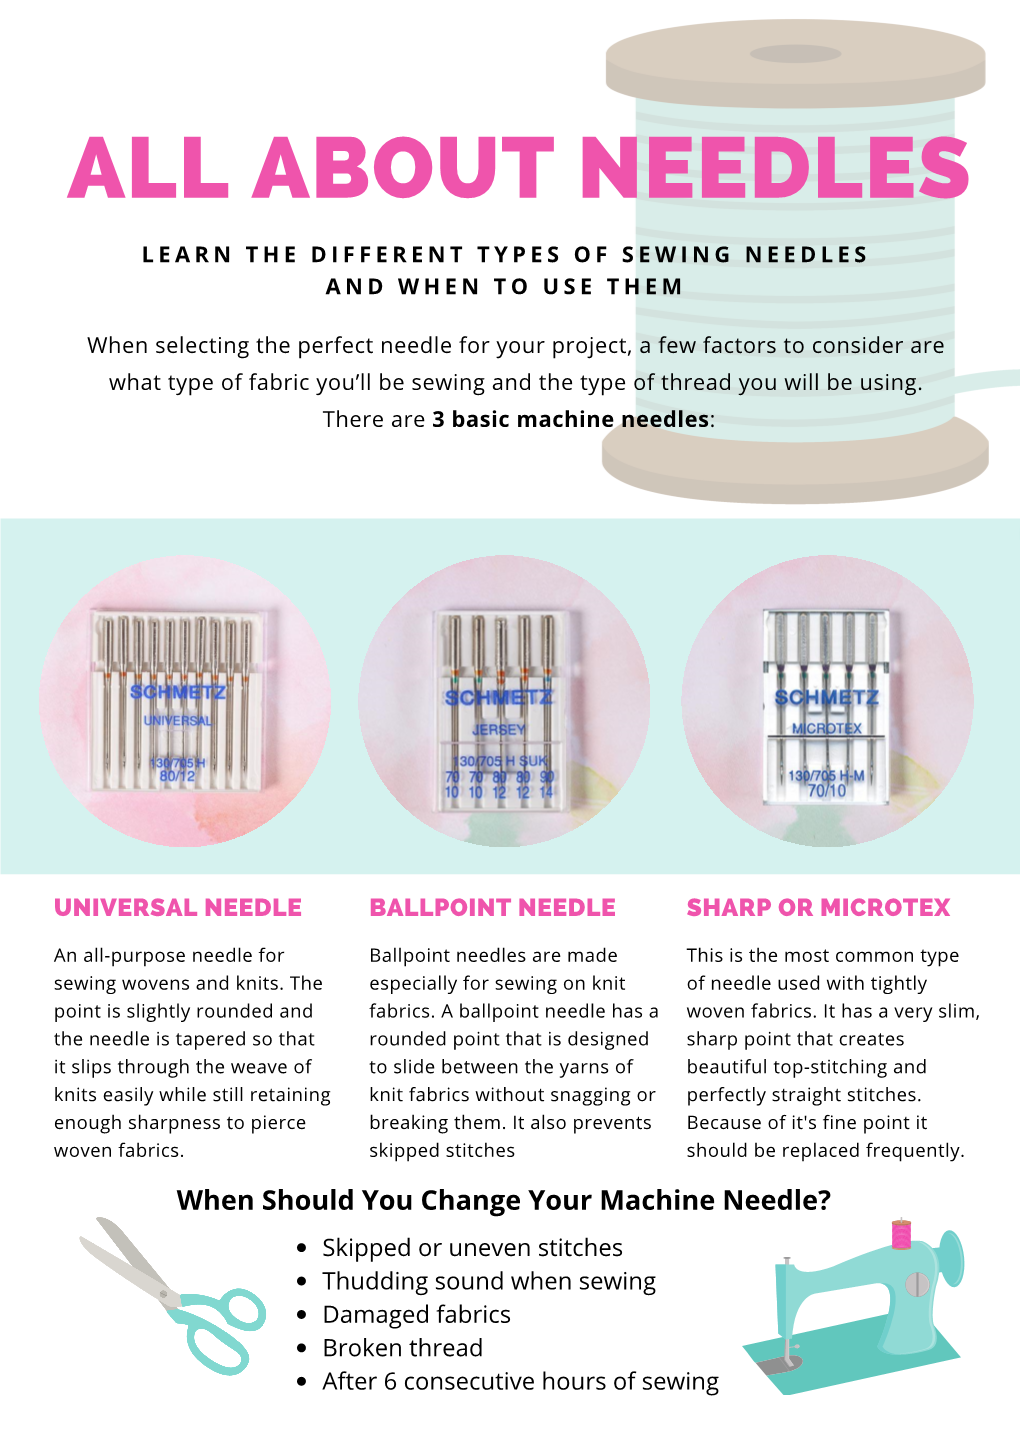 Learn the Different Types of Sewing Needles and When to Use Them